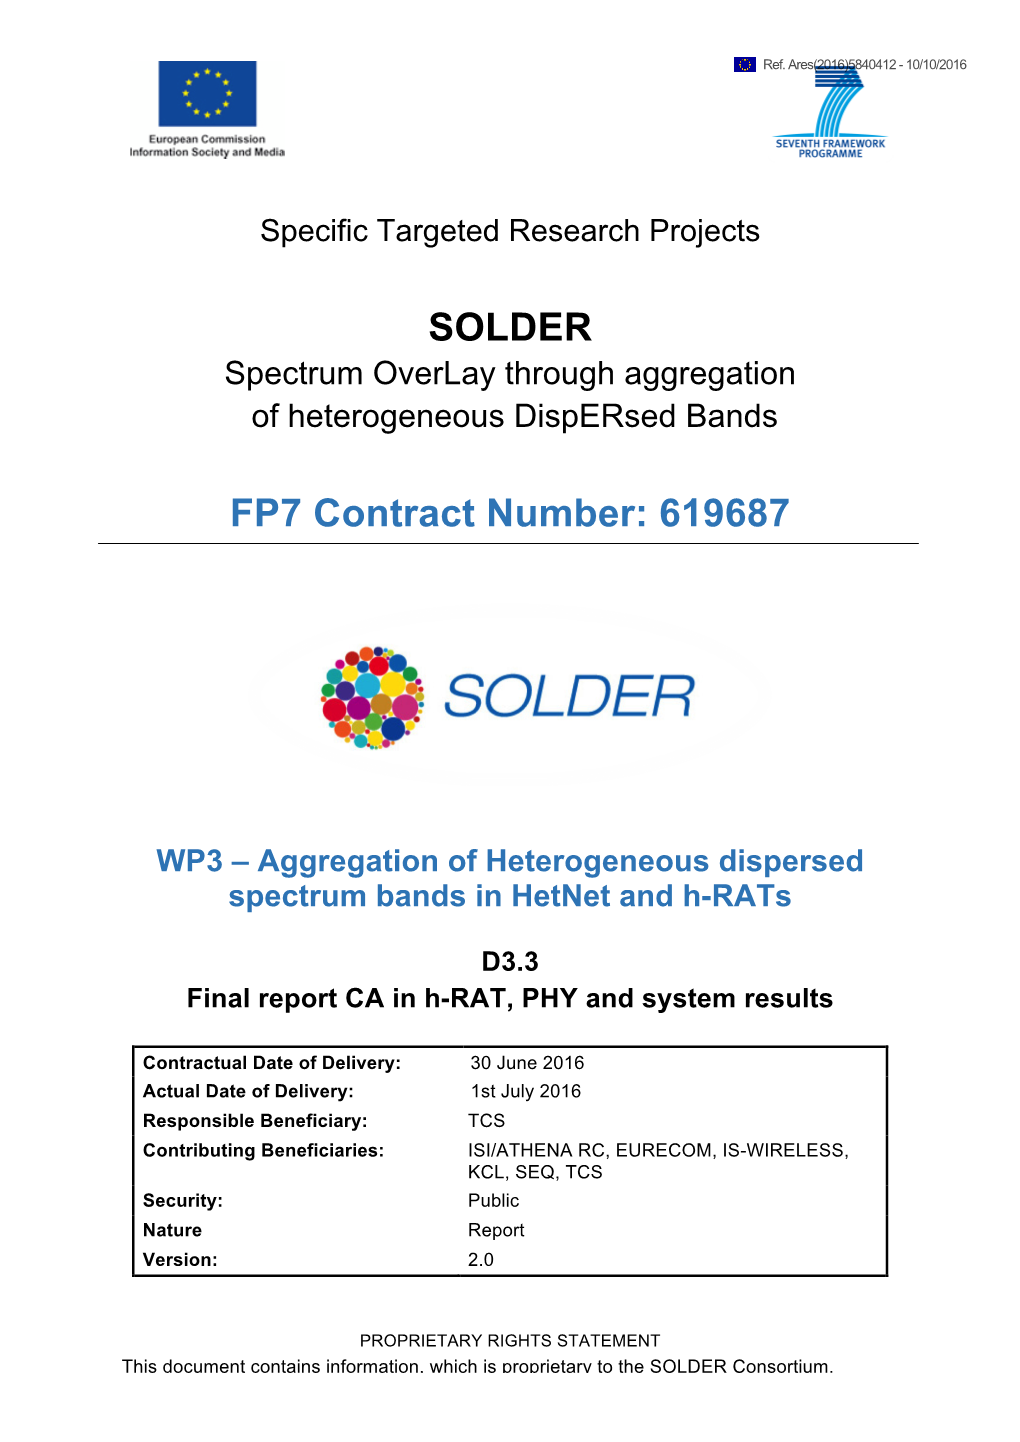 SOLDER FP7 Contract Number: 619687